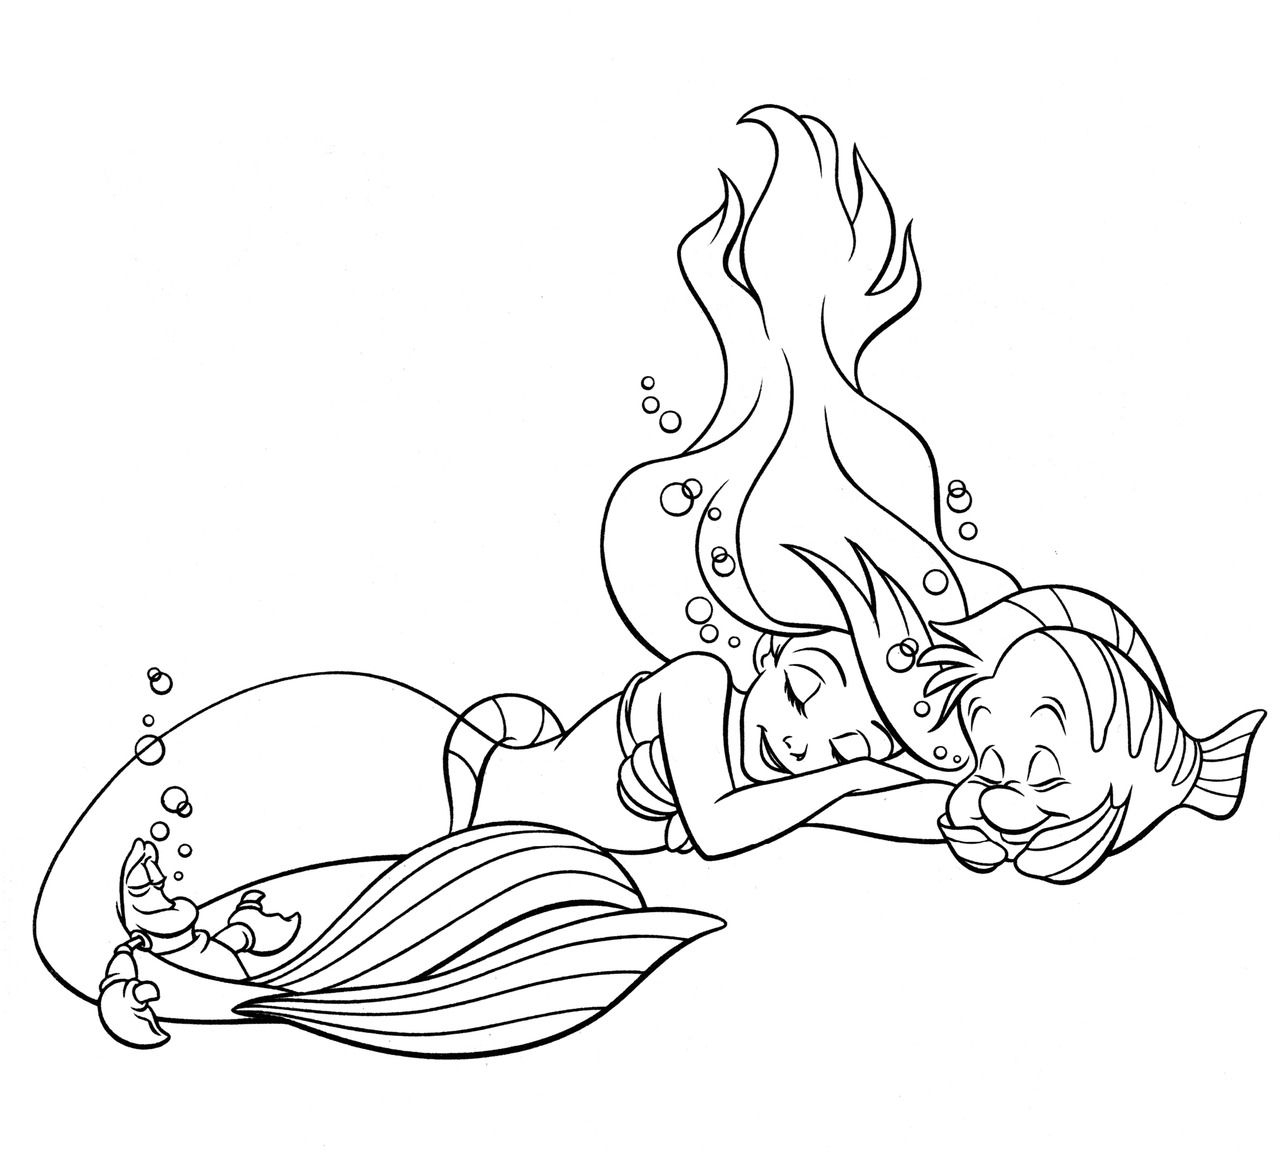 Free Ariel Coloring Pages Coloring Book Ideas Little Mermaid Ariel Coloring Pages Google